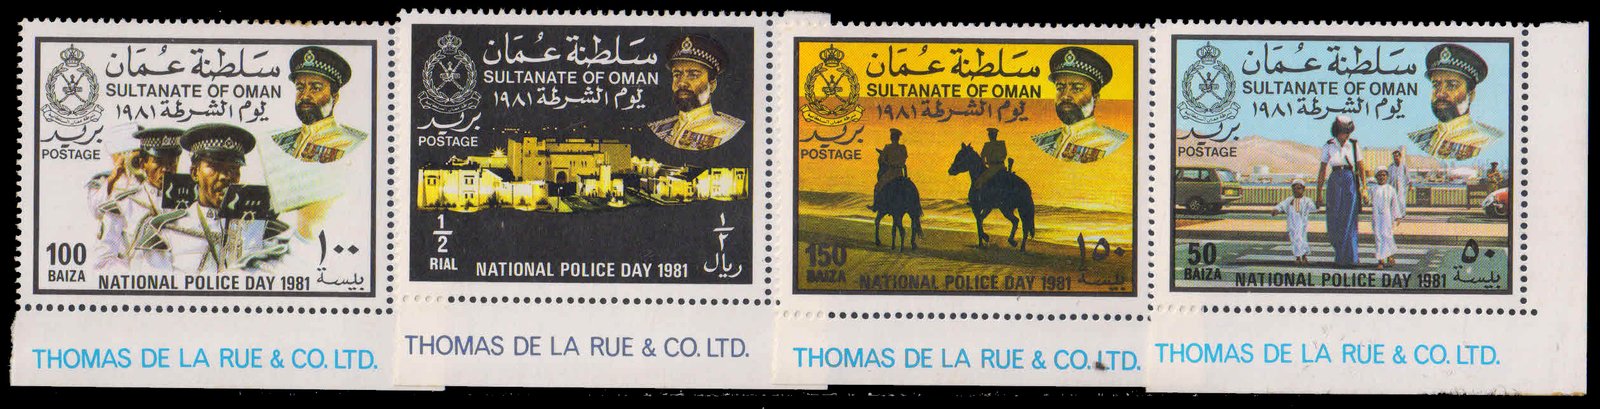 OMAN 1981-National Police Day, Set of 4, MNH, S.G. 237-240-Cat £ 35-